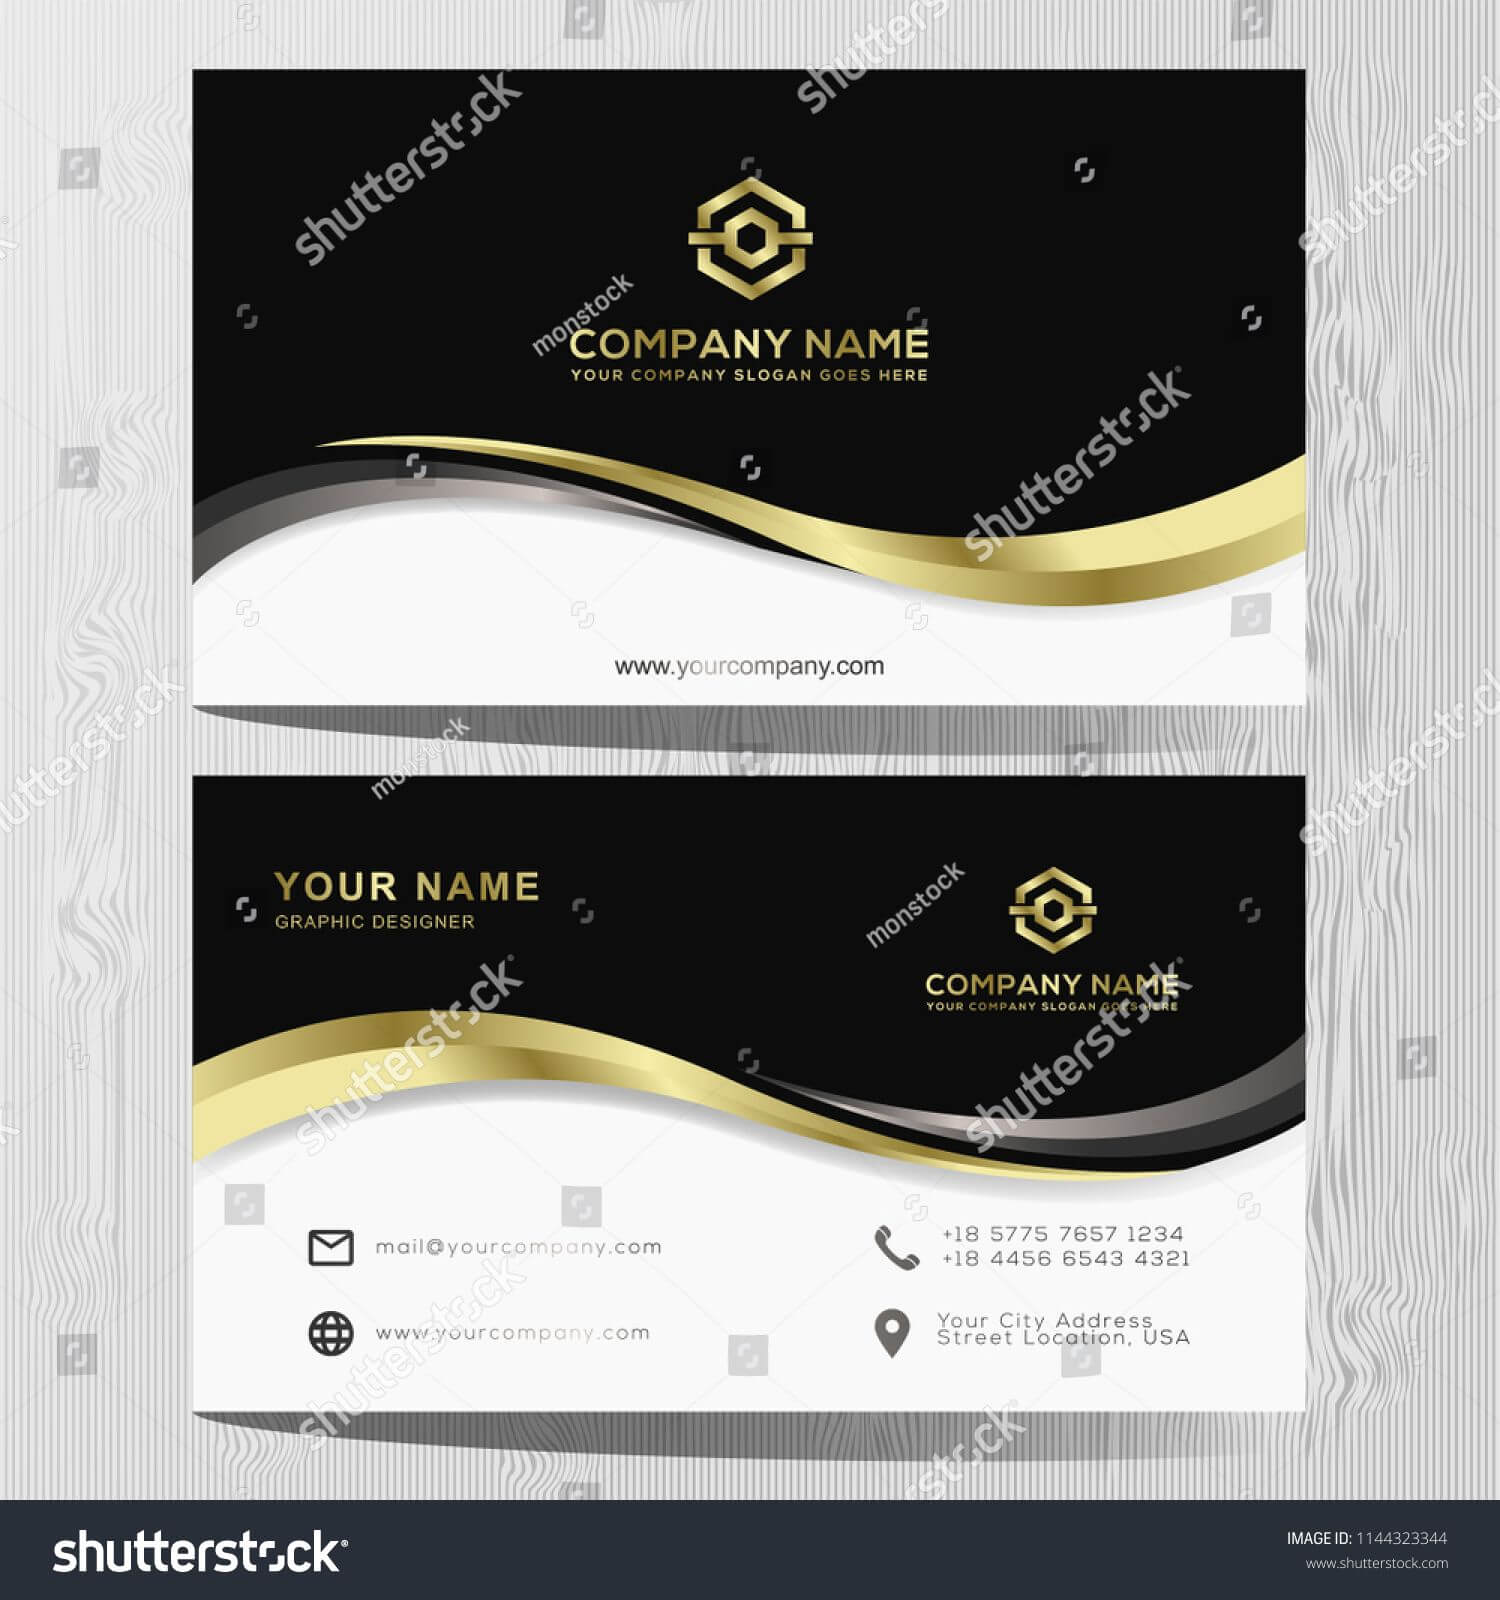 Luxury And Elegant Black Gold Business Cards Template On Inside Advertising Cards Templates